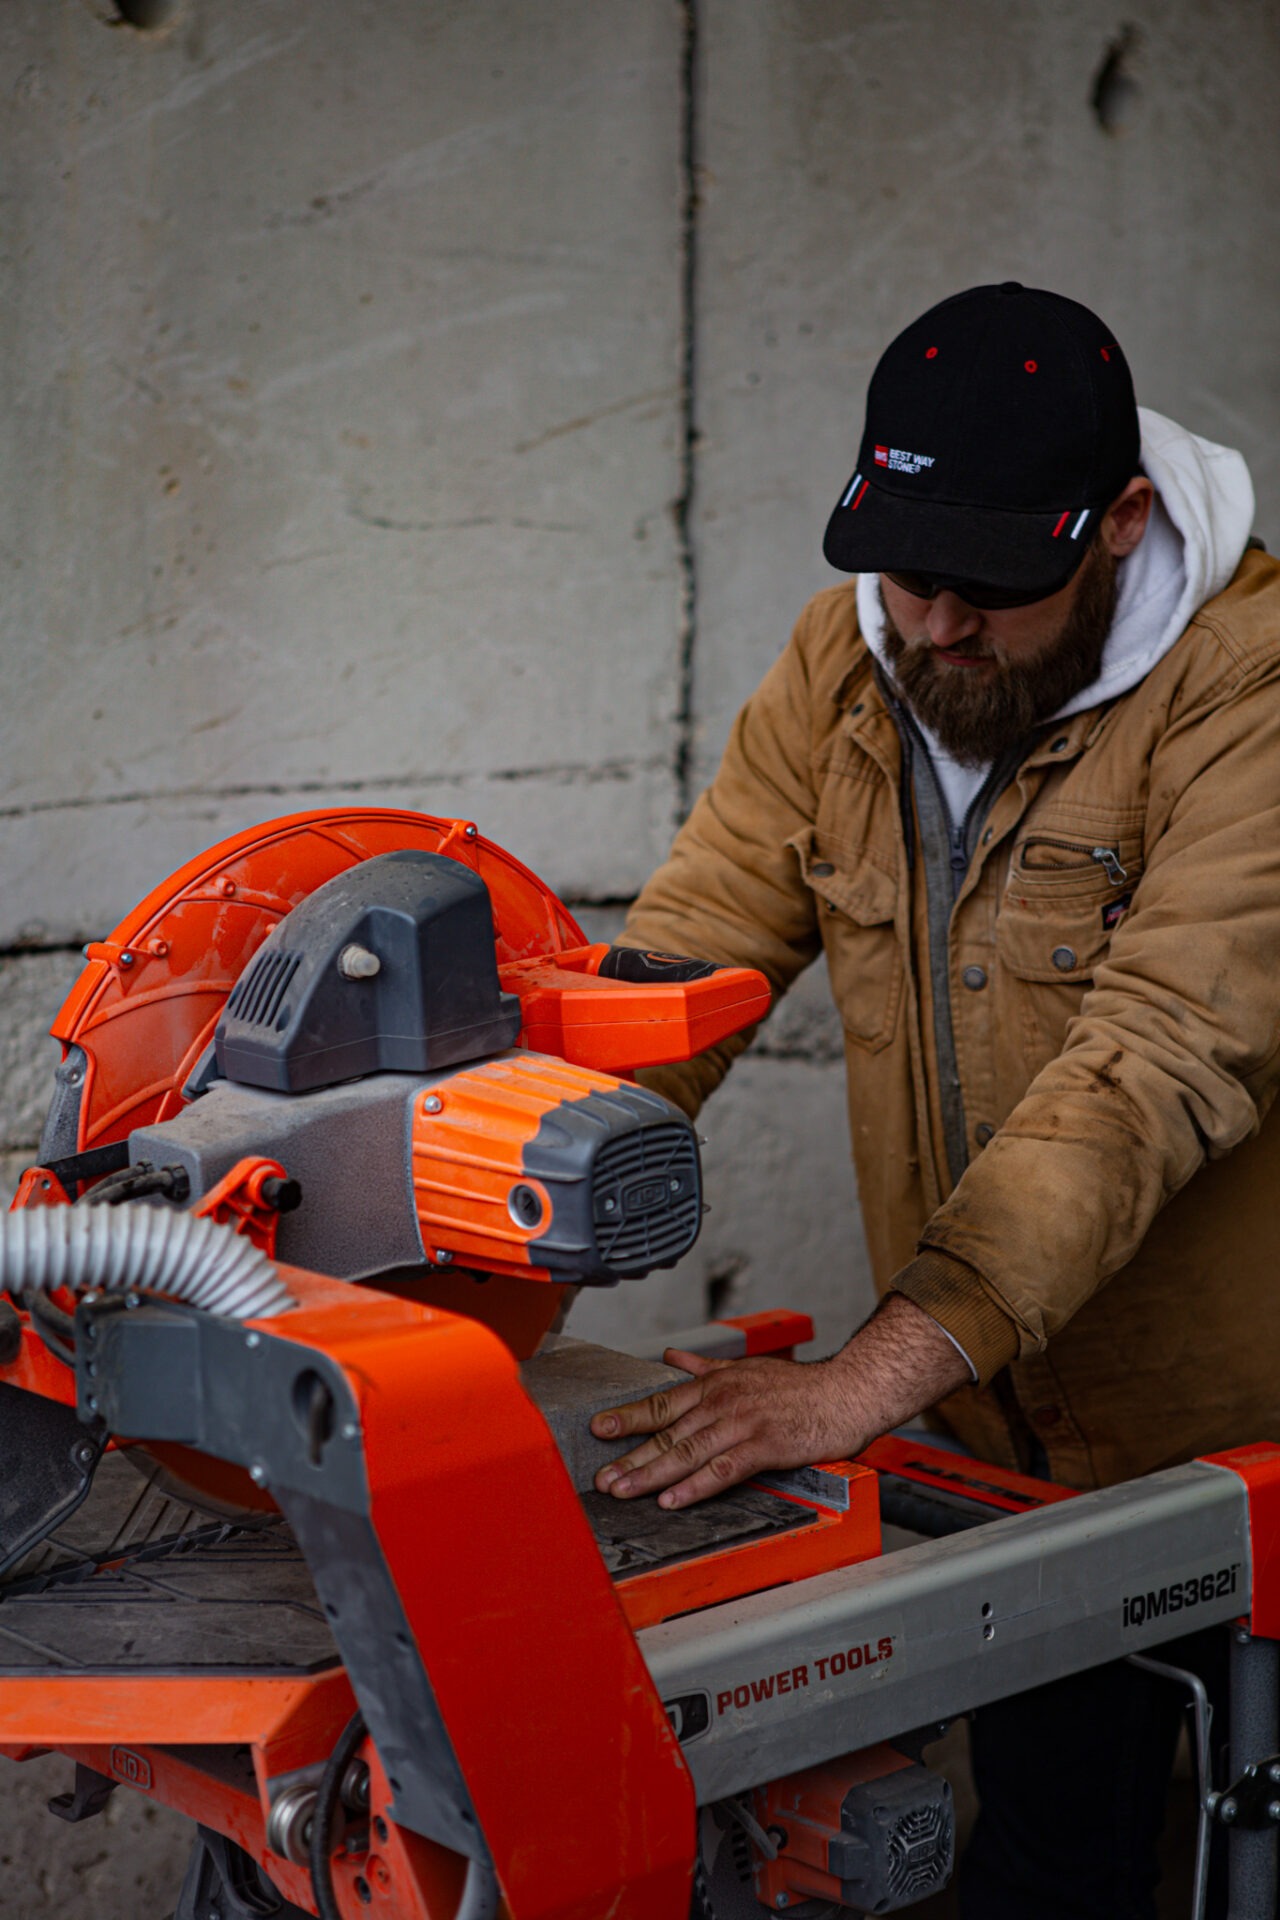 A person wearing a cap and a jacket operates an orange and gray concrete saw, with a focus on precision and safety.